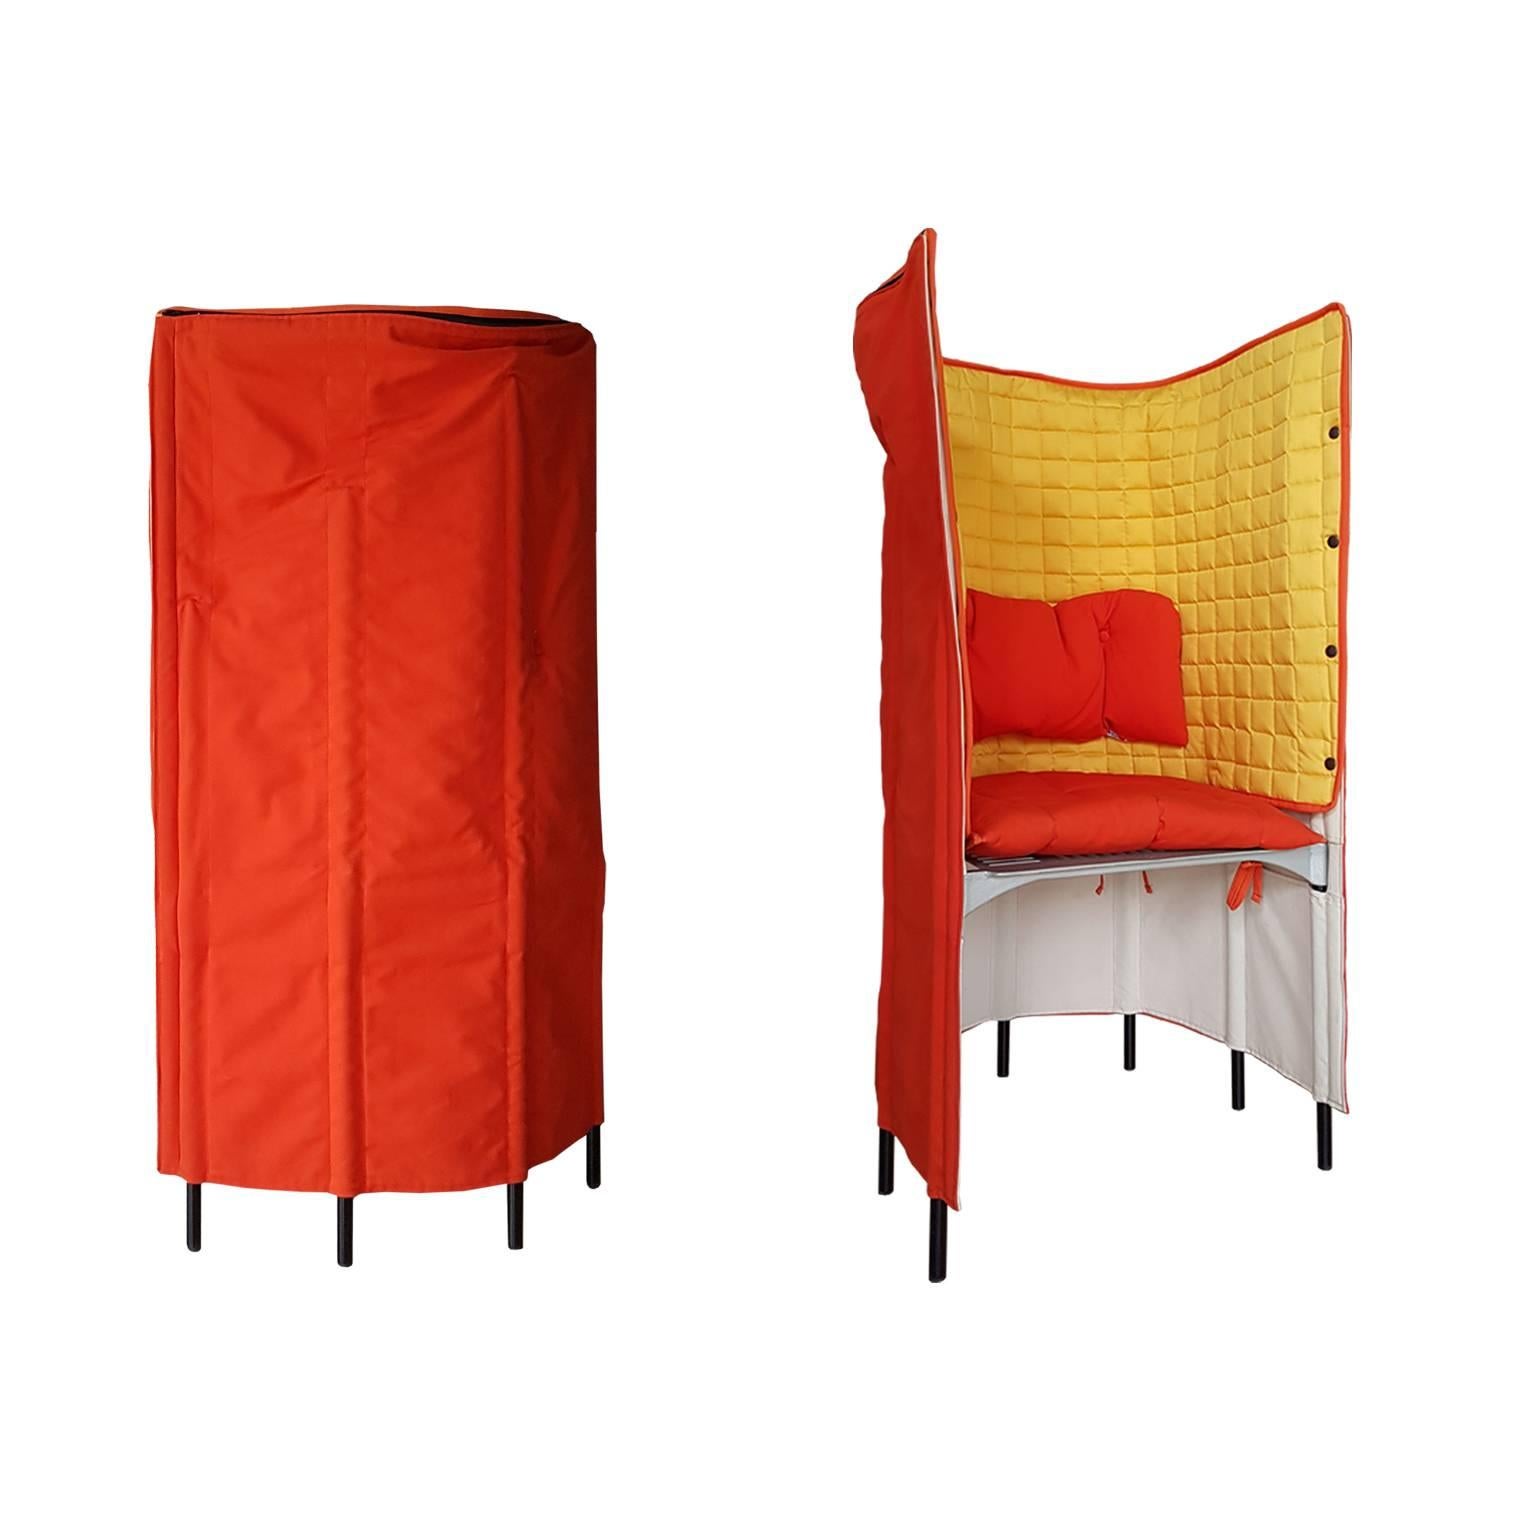 Post-Modern Contemporary Armchair by Gaetano Pesce in Orange Yellow Canvas 21th Century